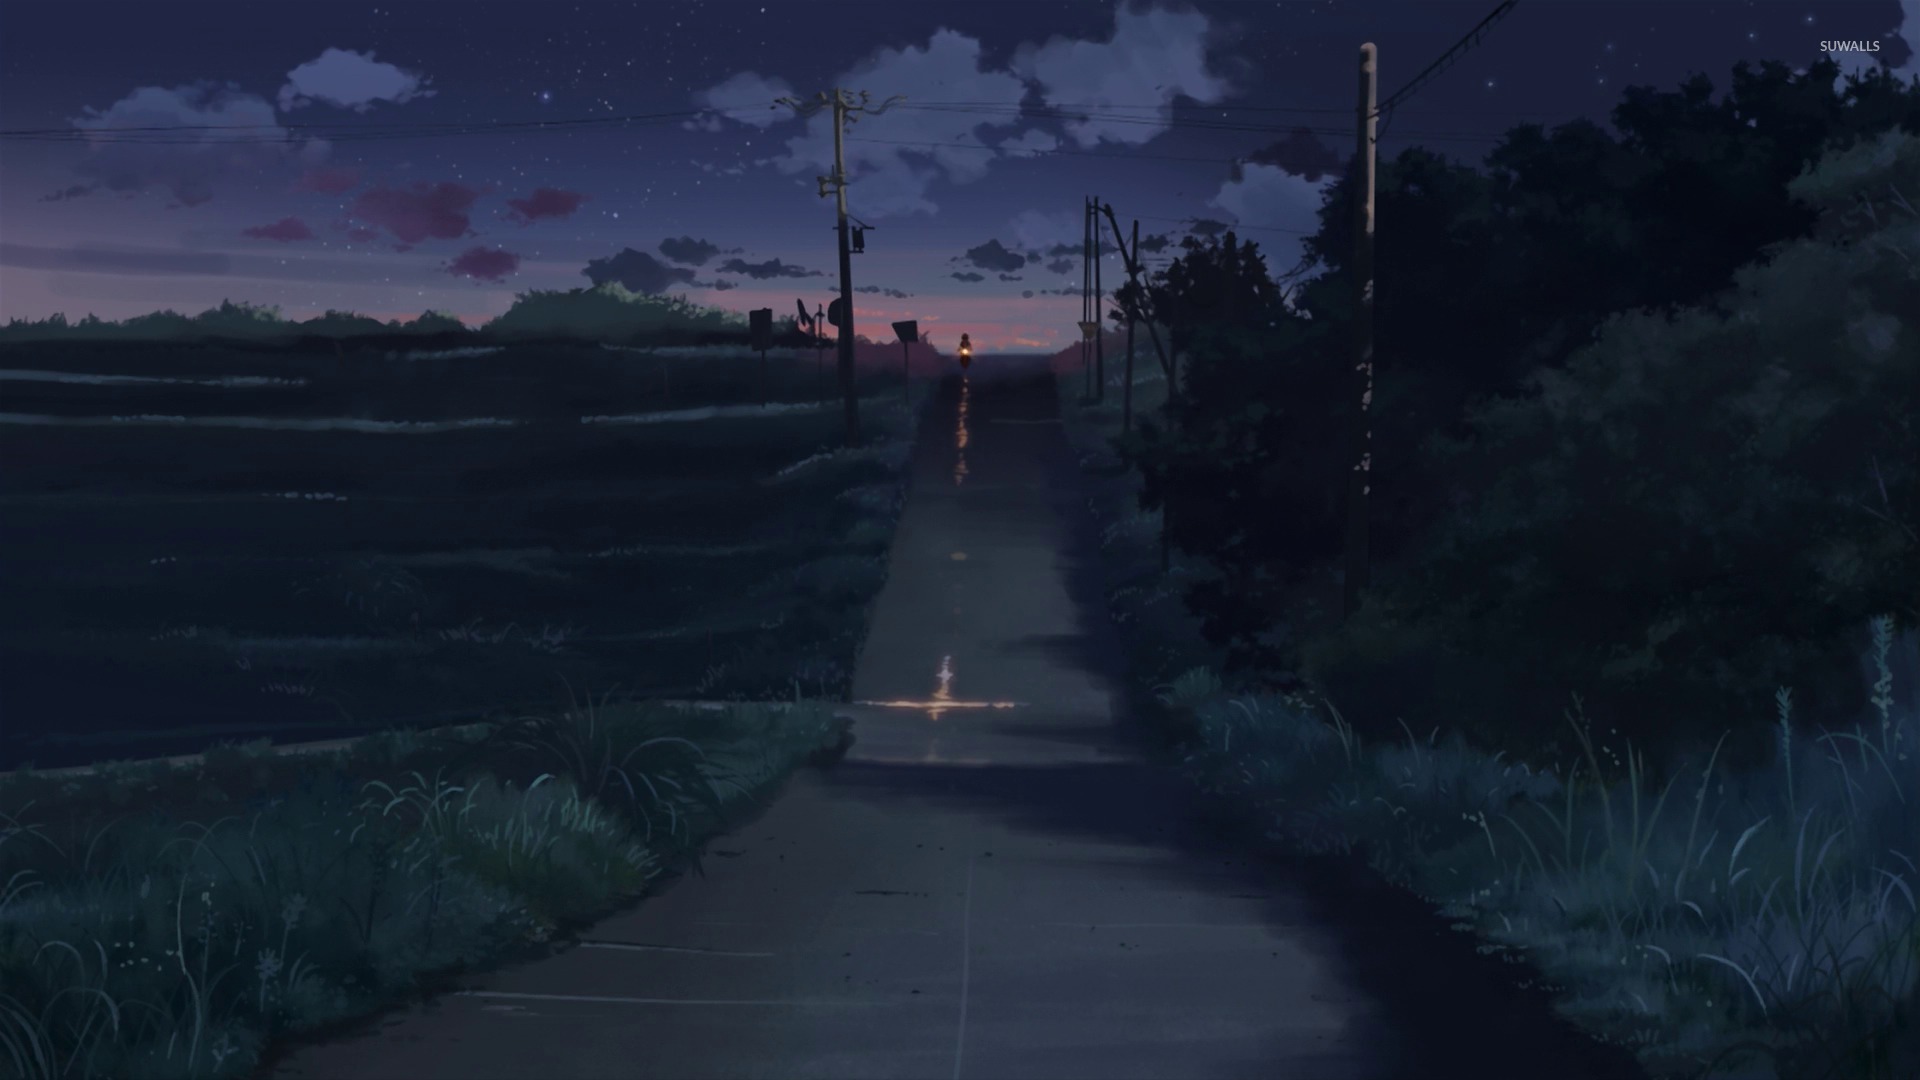 5 Centimeters Per Second 4 wallpaper - Anime wallpapers - #28572 ...